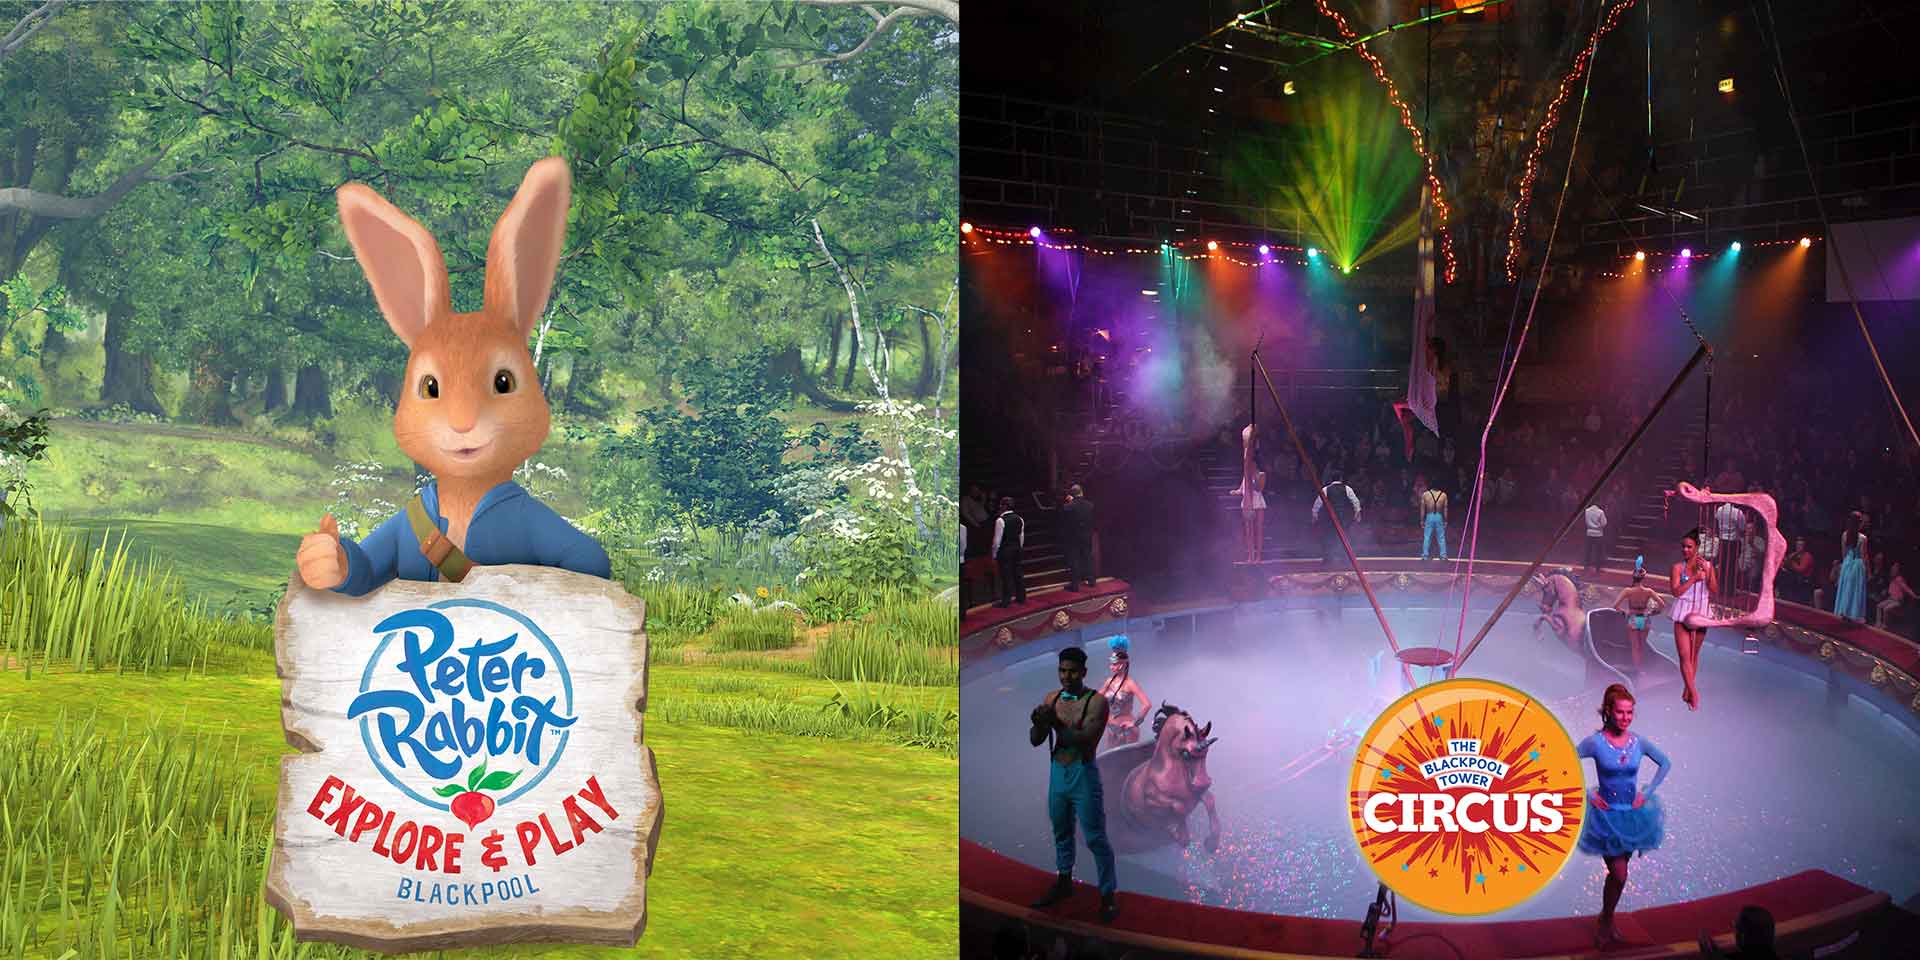 Peter Rabbit Explore and Play plus The Blackpool Tower Circus